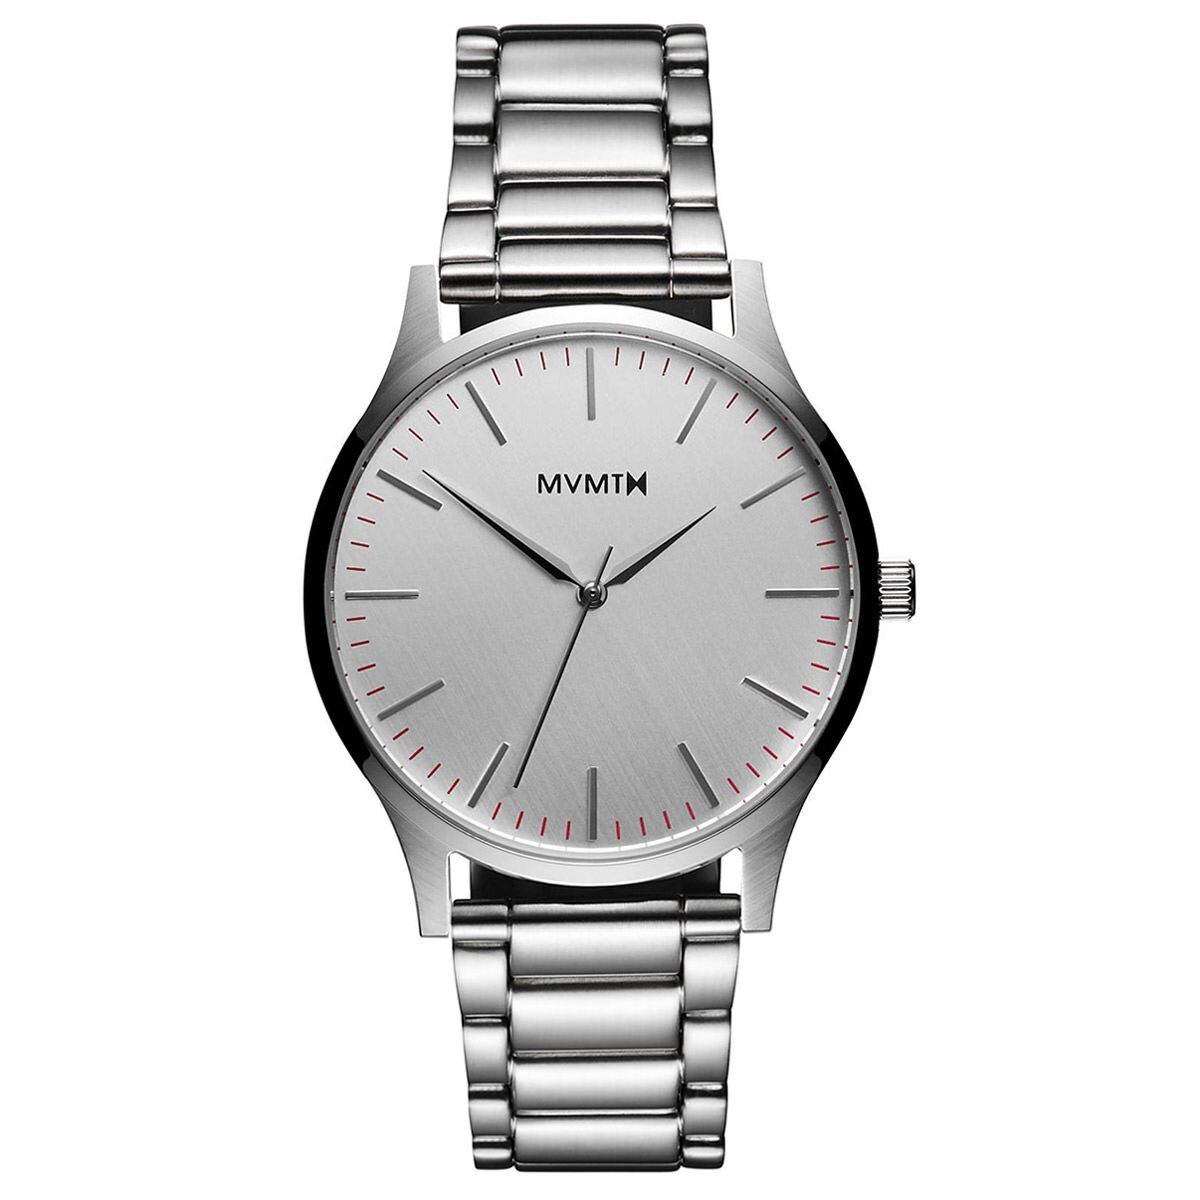 40 SERIES WATCHES FEATURE A SLIGHTLY SMALLER 40MM DIAMETER CASE